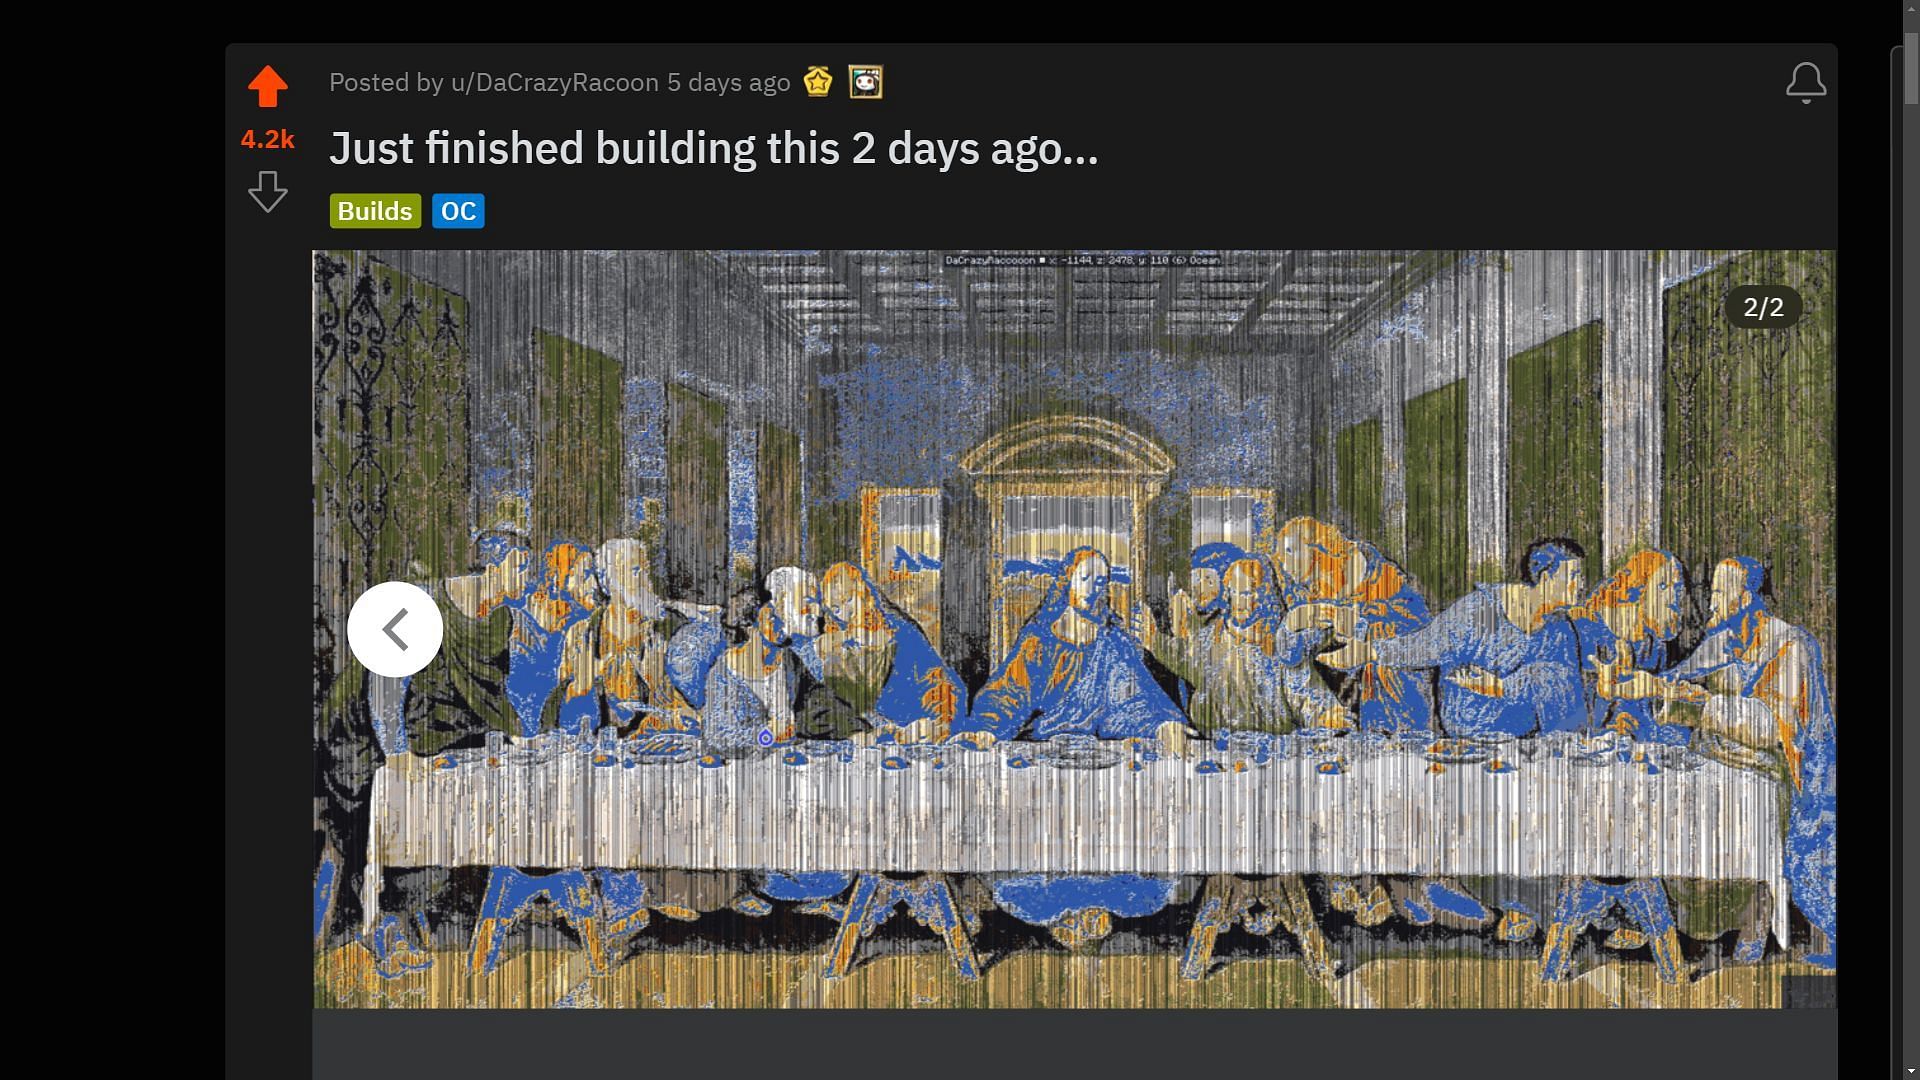 The second media is a GIF showcasing a timelapse of how the Minecraft Redditor created the map art (Image via Reddit/u/DaCrazyRacoon)